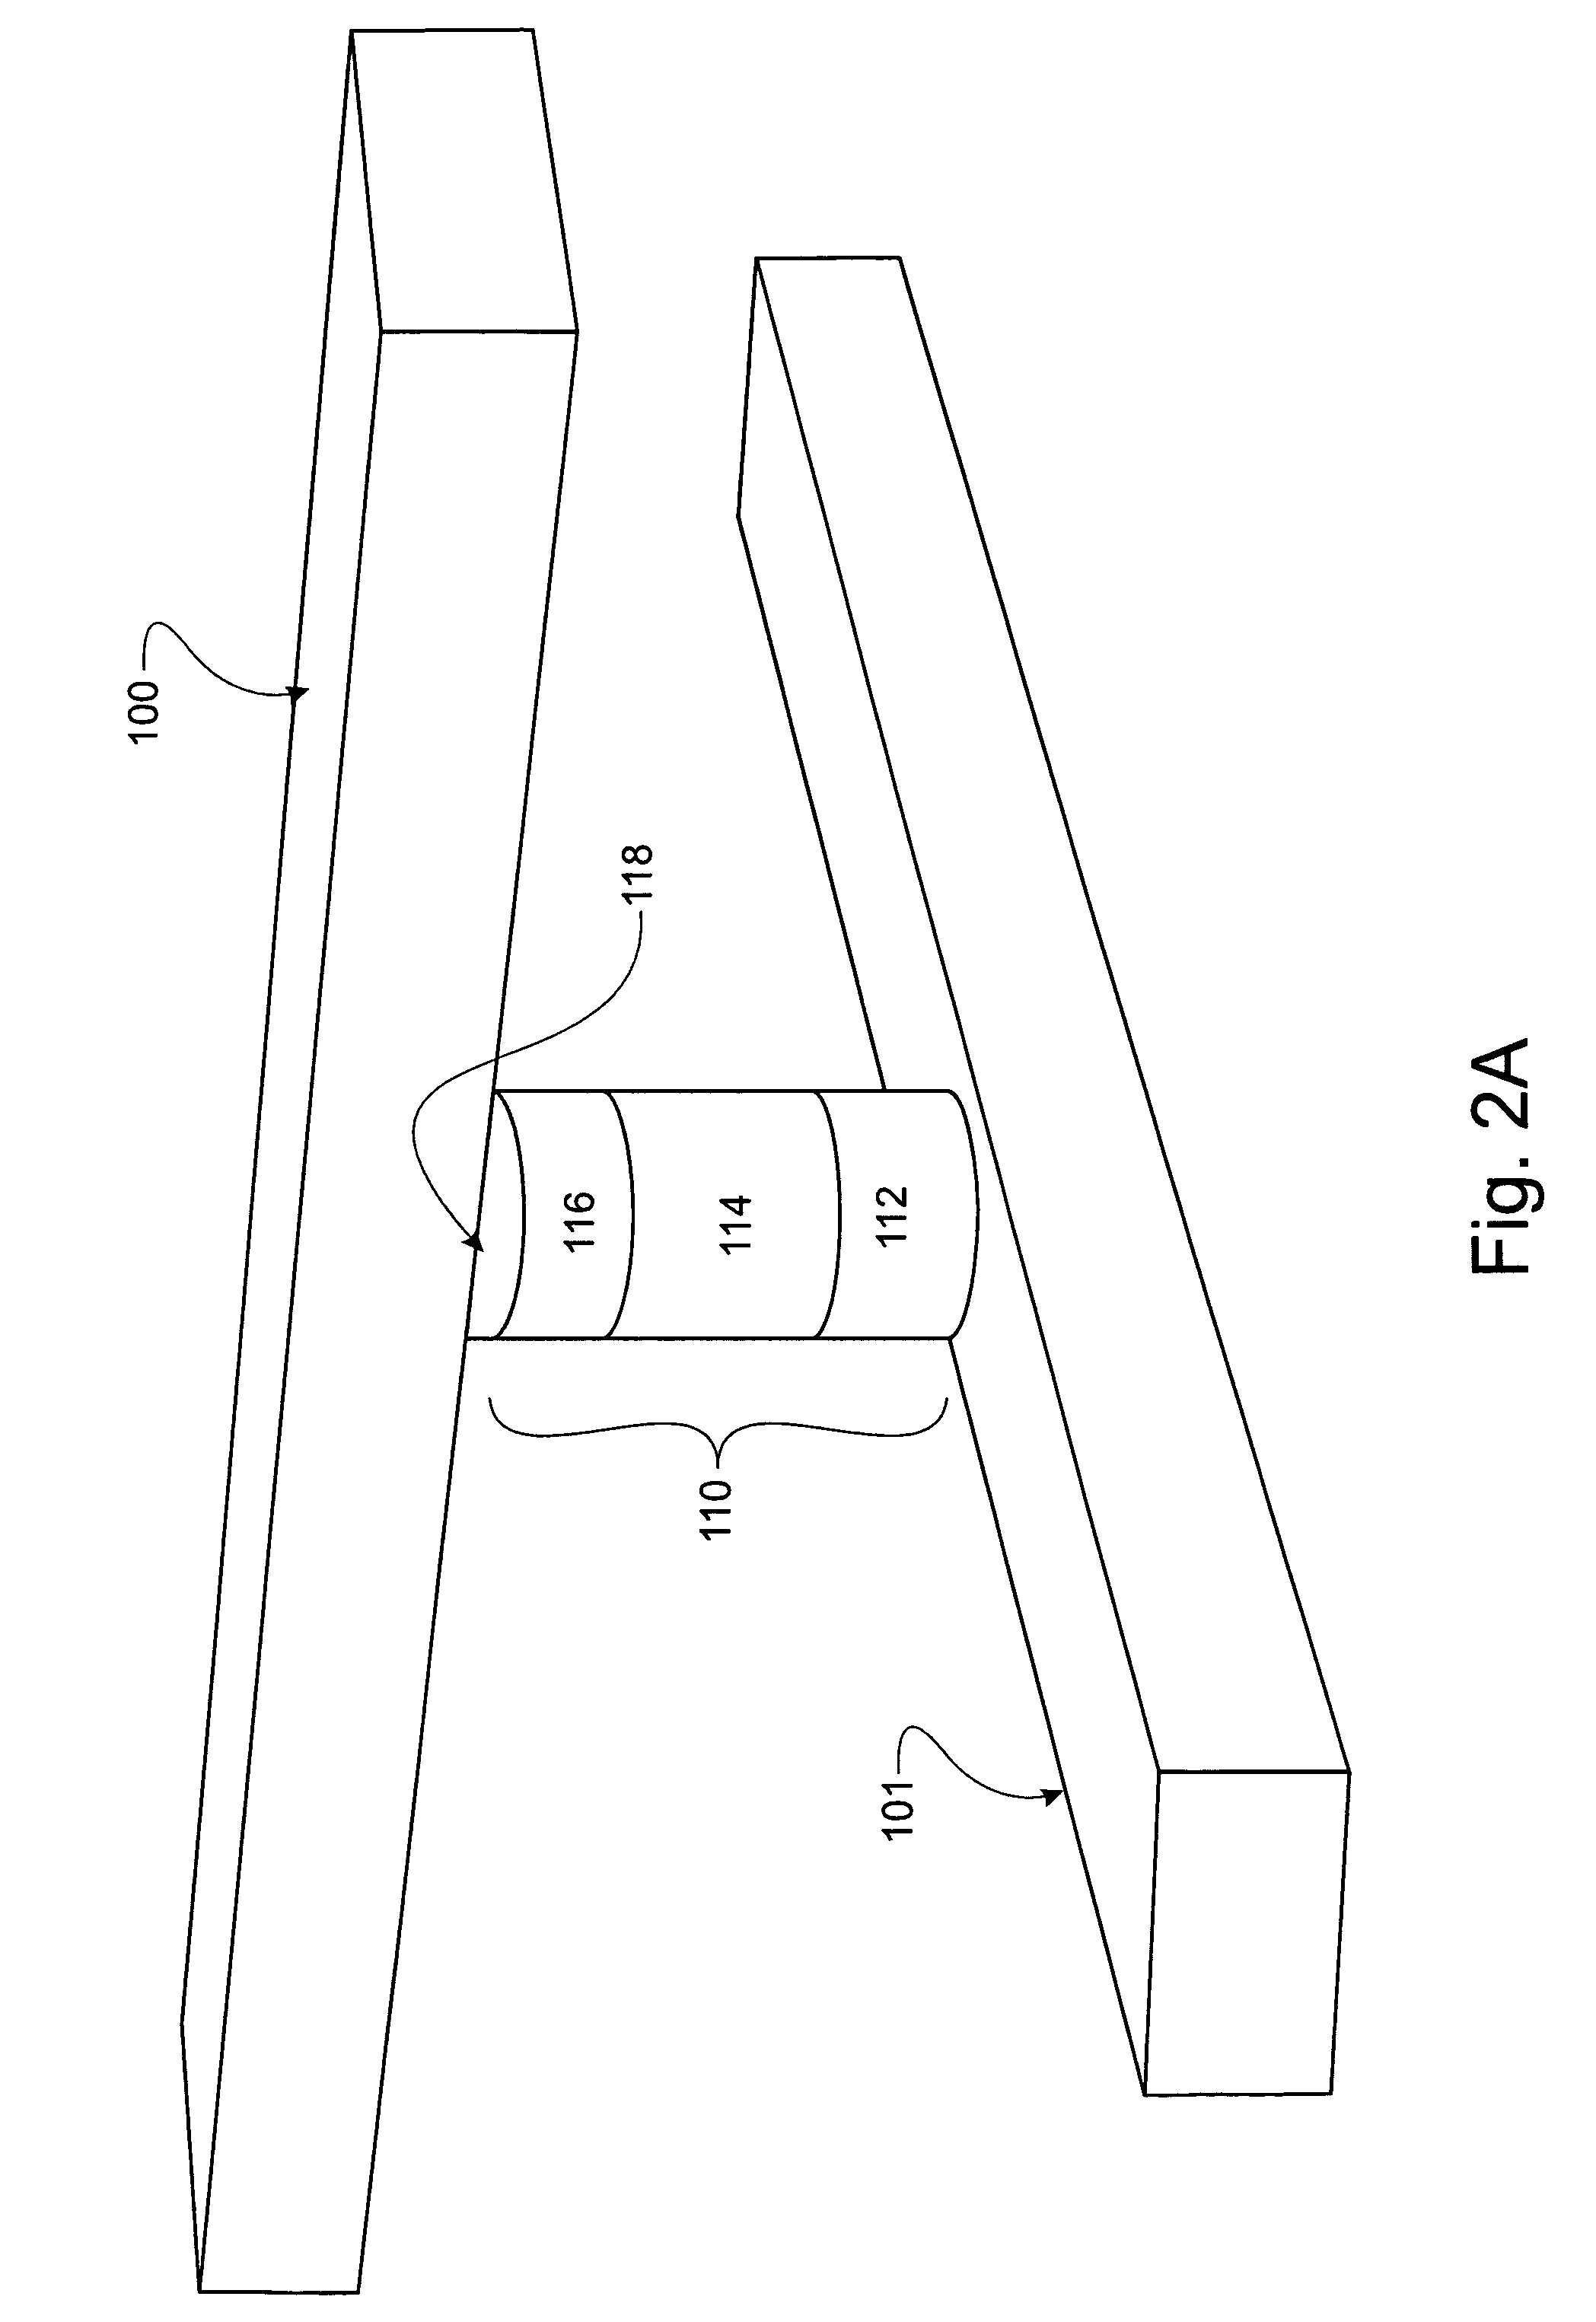 Multilevel nonvolatile memory device containing a carbon storage material and methods of making and using same